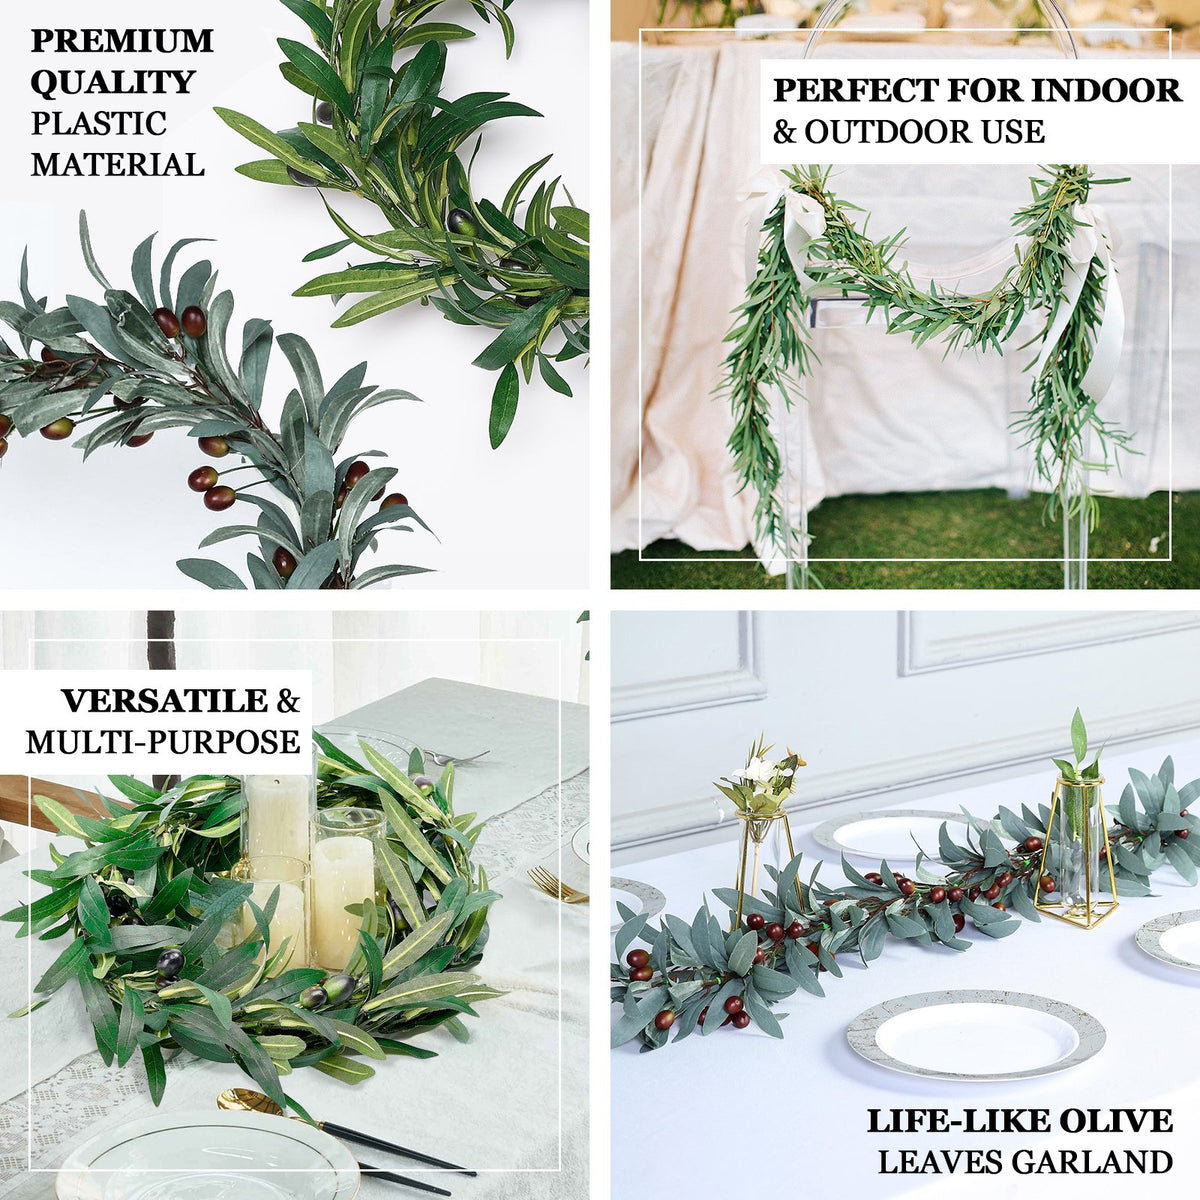 Efavormart 6ft Faux Olive Branch Garland, Artificial Vine Greenery Garland with Olives, Size: 6